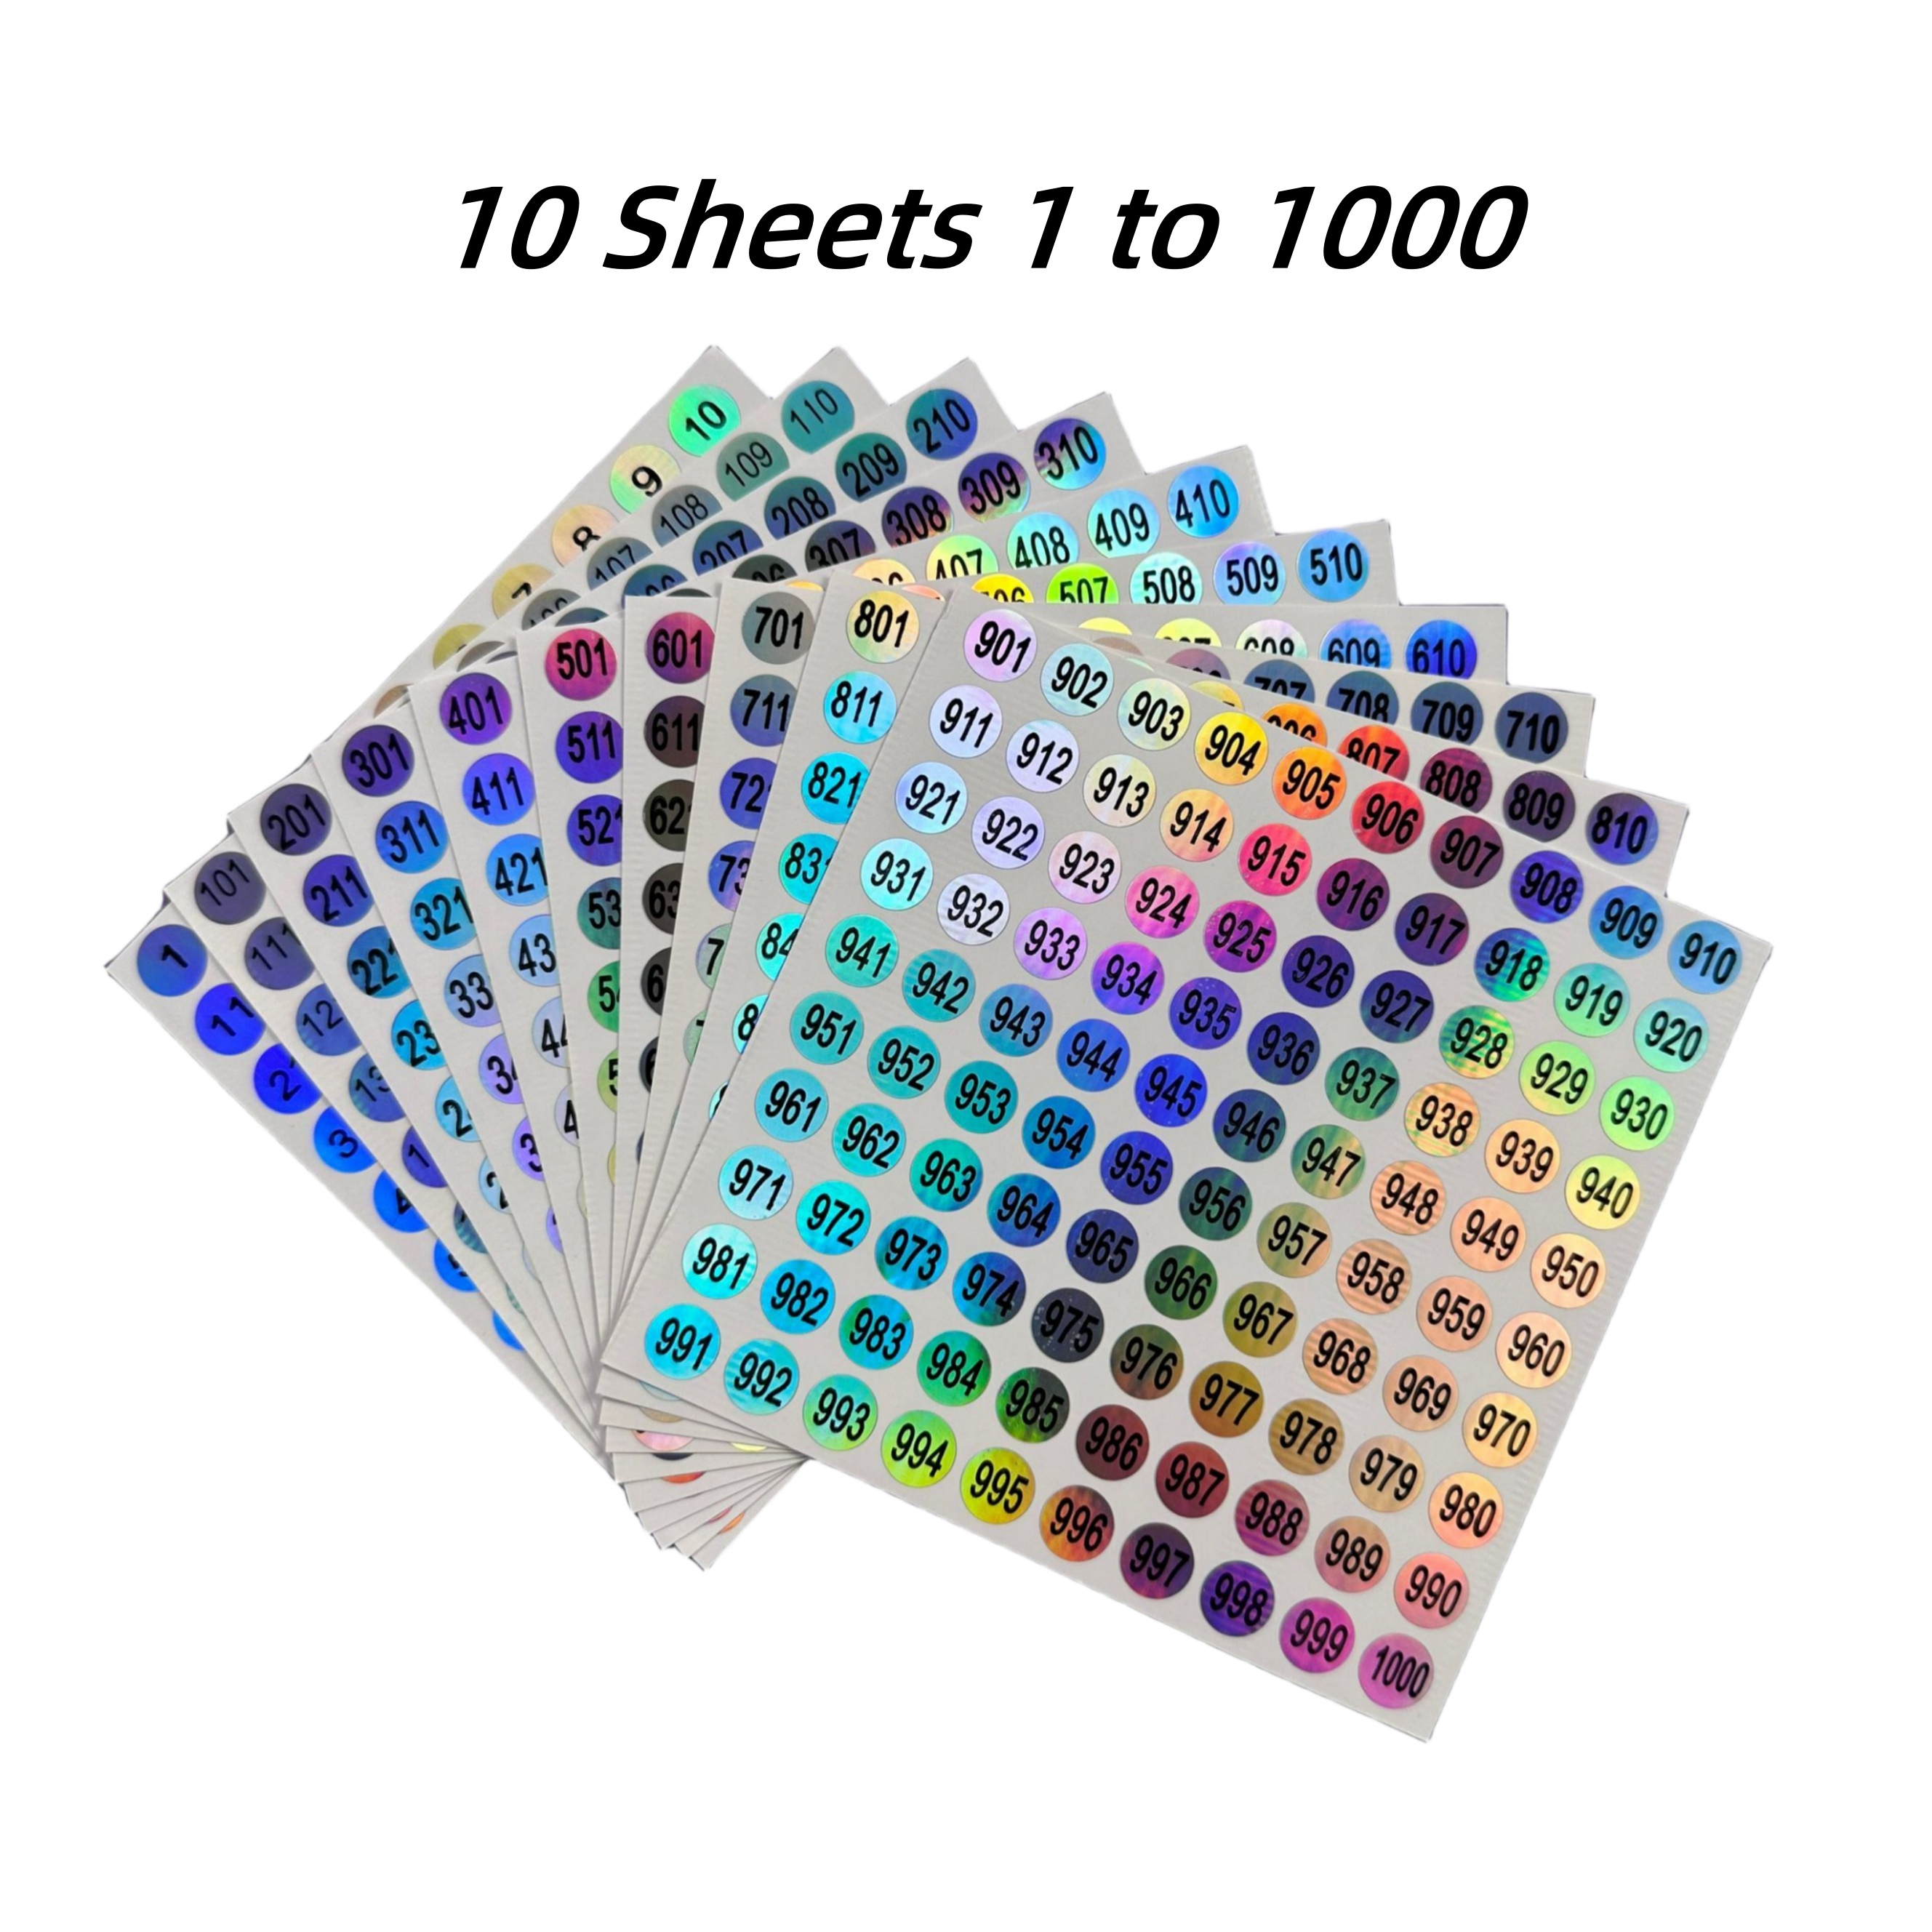 

10 Sheets Of 1 To 1000pcs Of Reflective Laser Small Round Consecutive Number Stickers, Self-adhesive Inventory Storage And Organization Labels, 0.4 Inches For Home, School, And Office Decoration